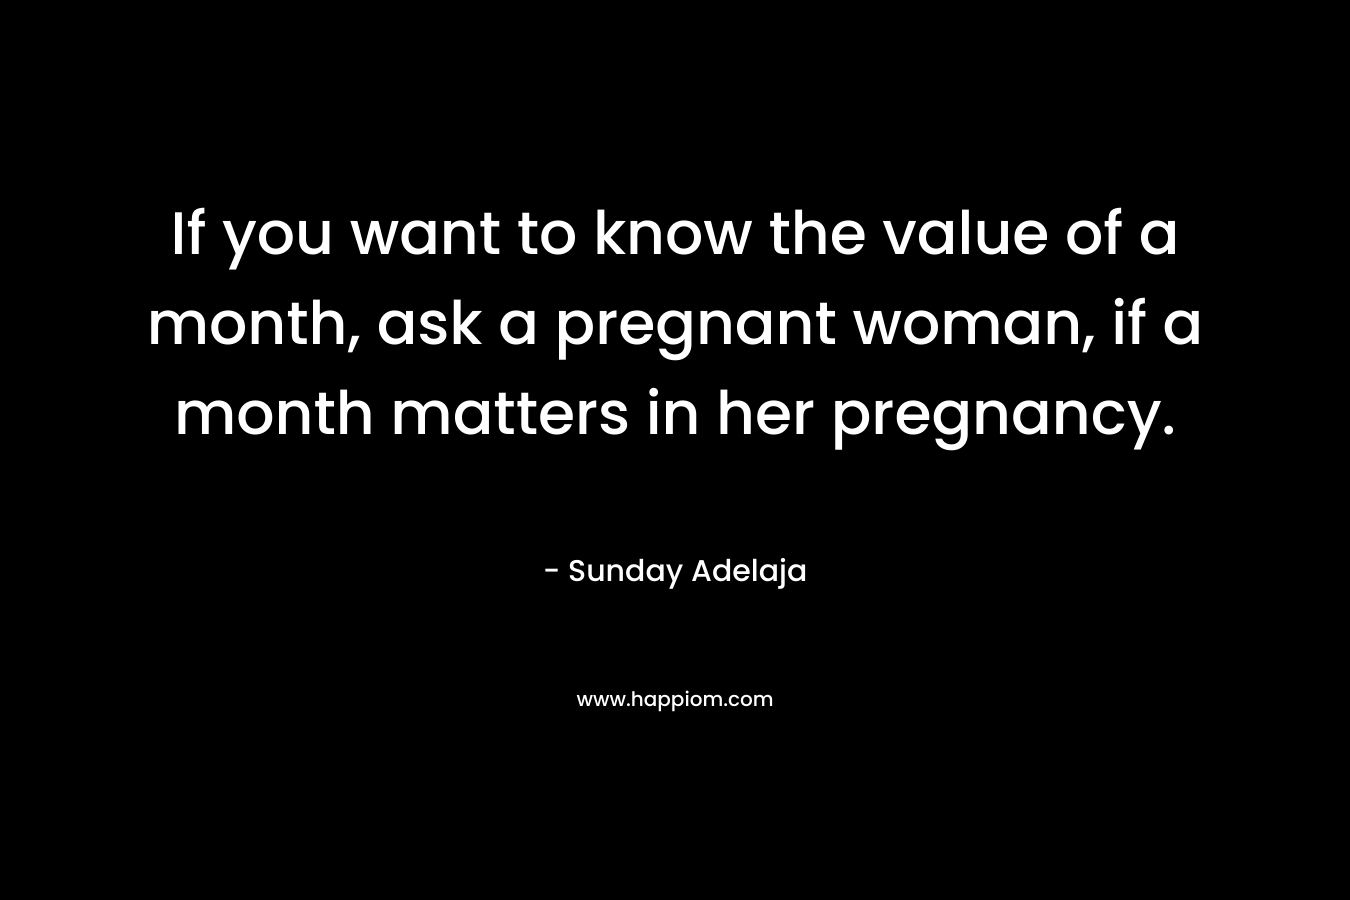 If you want to know the value of a month, ask a pregnant woman, if a month matters in her pregnancy. – Sunday Adelaja